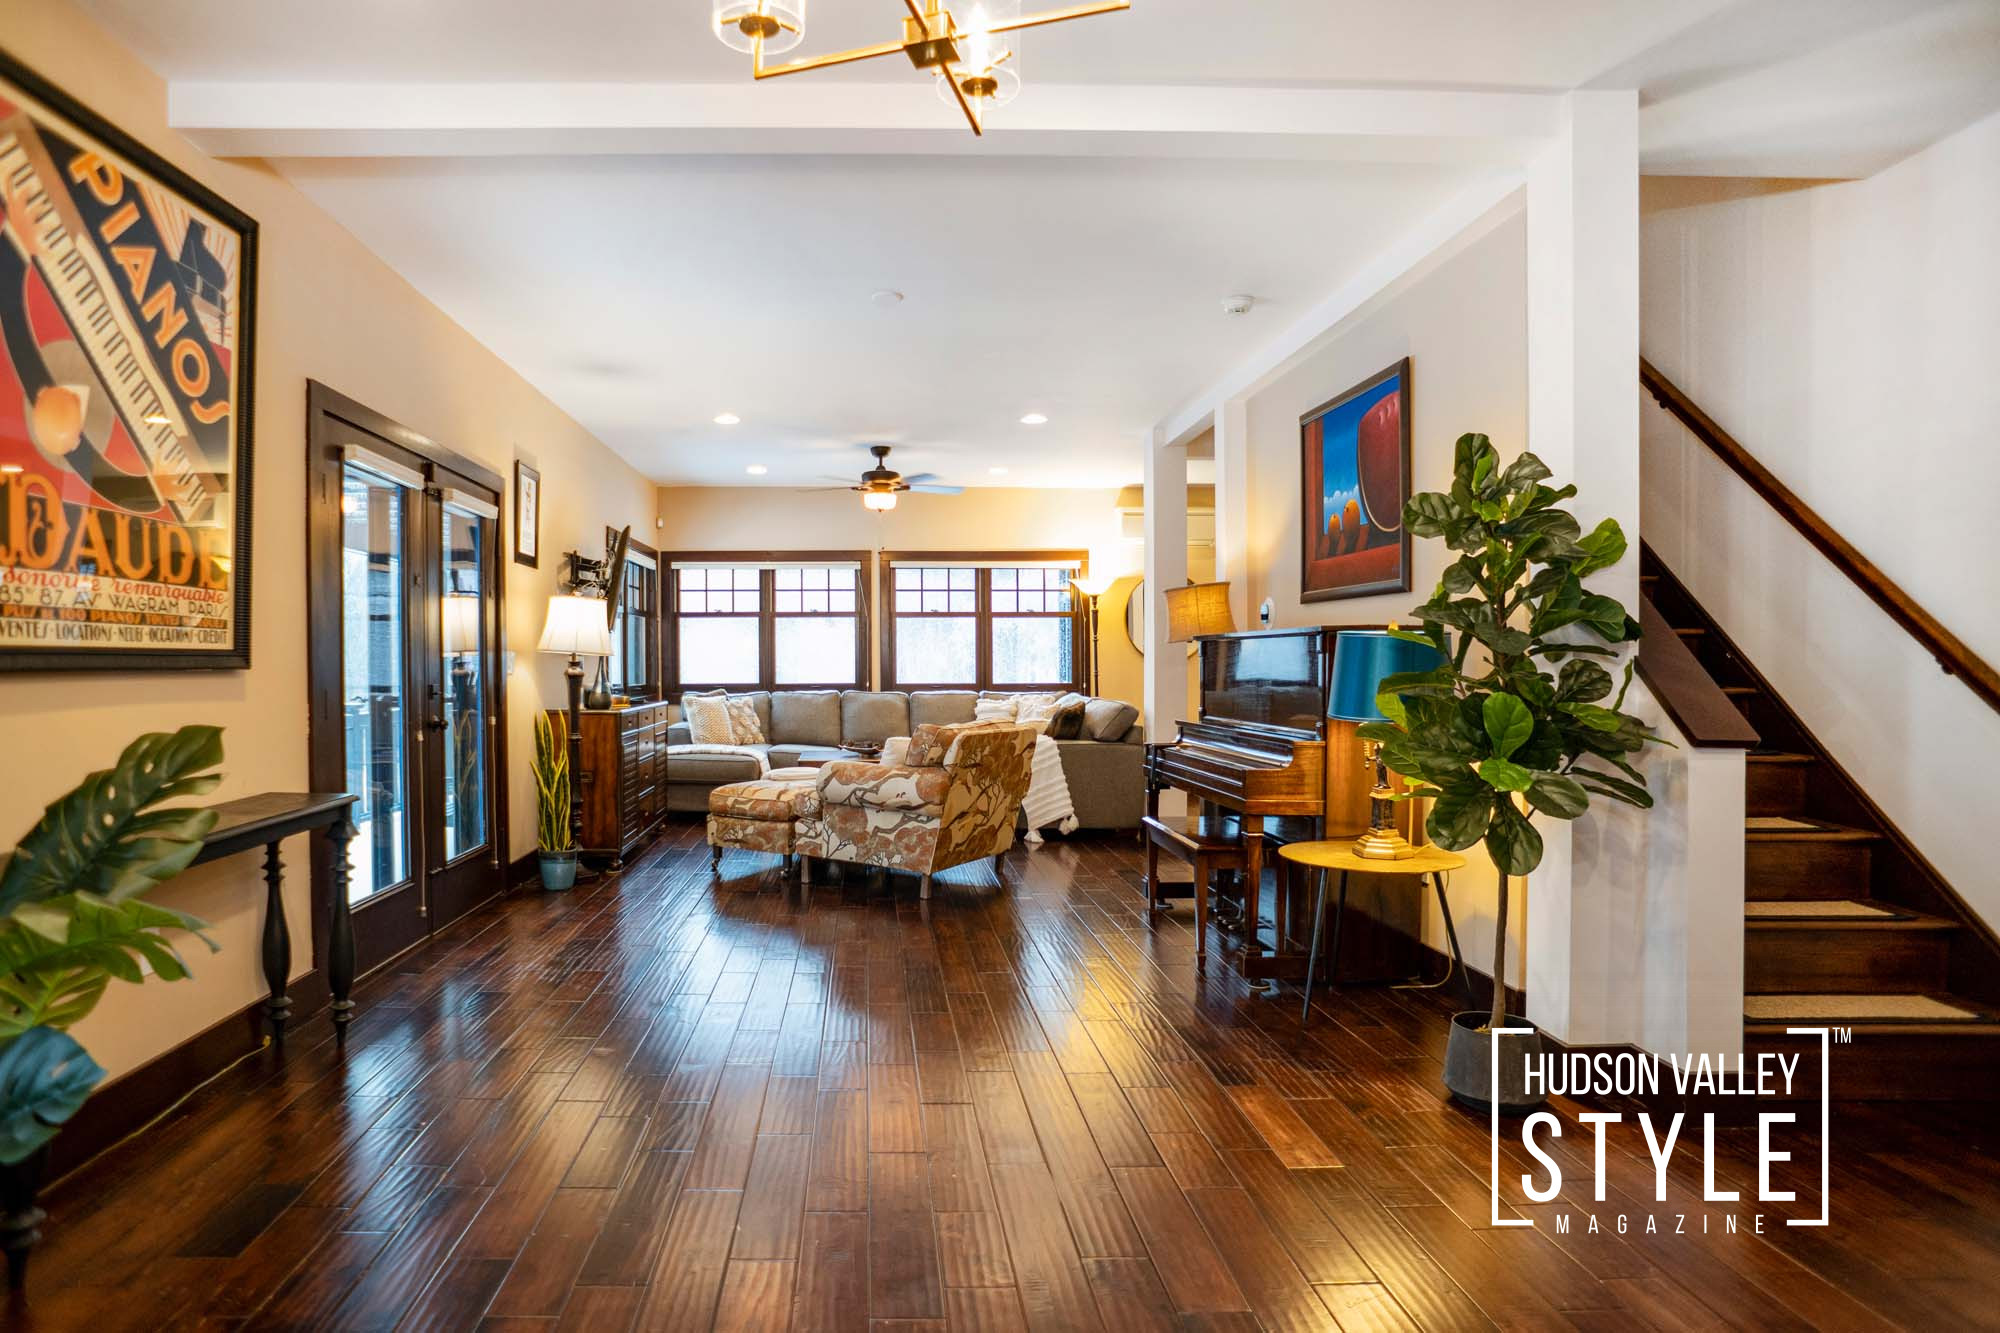 Considering buying a house in the Catskill Mountains or Hudson Valley? – Featured Hudson Valley Home for Sale in Catskill, NY – Real Estate Photography by Alluvion Media